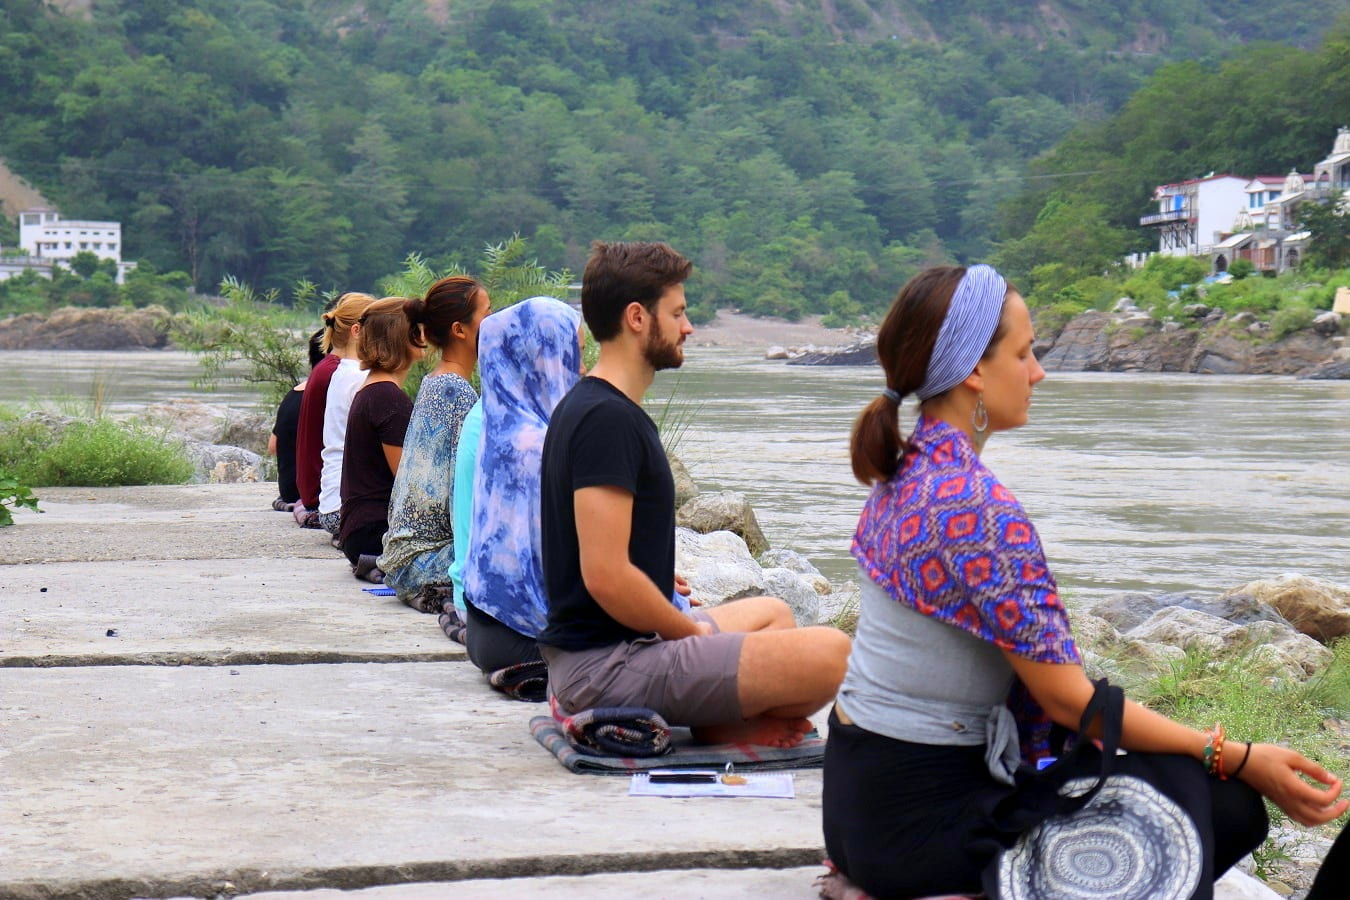 Image of people meditating near a body of water